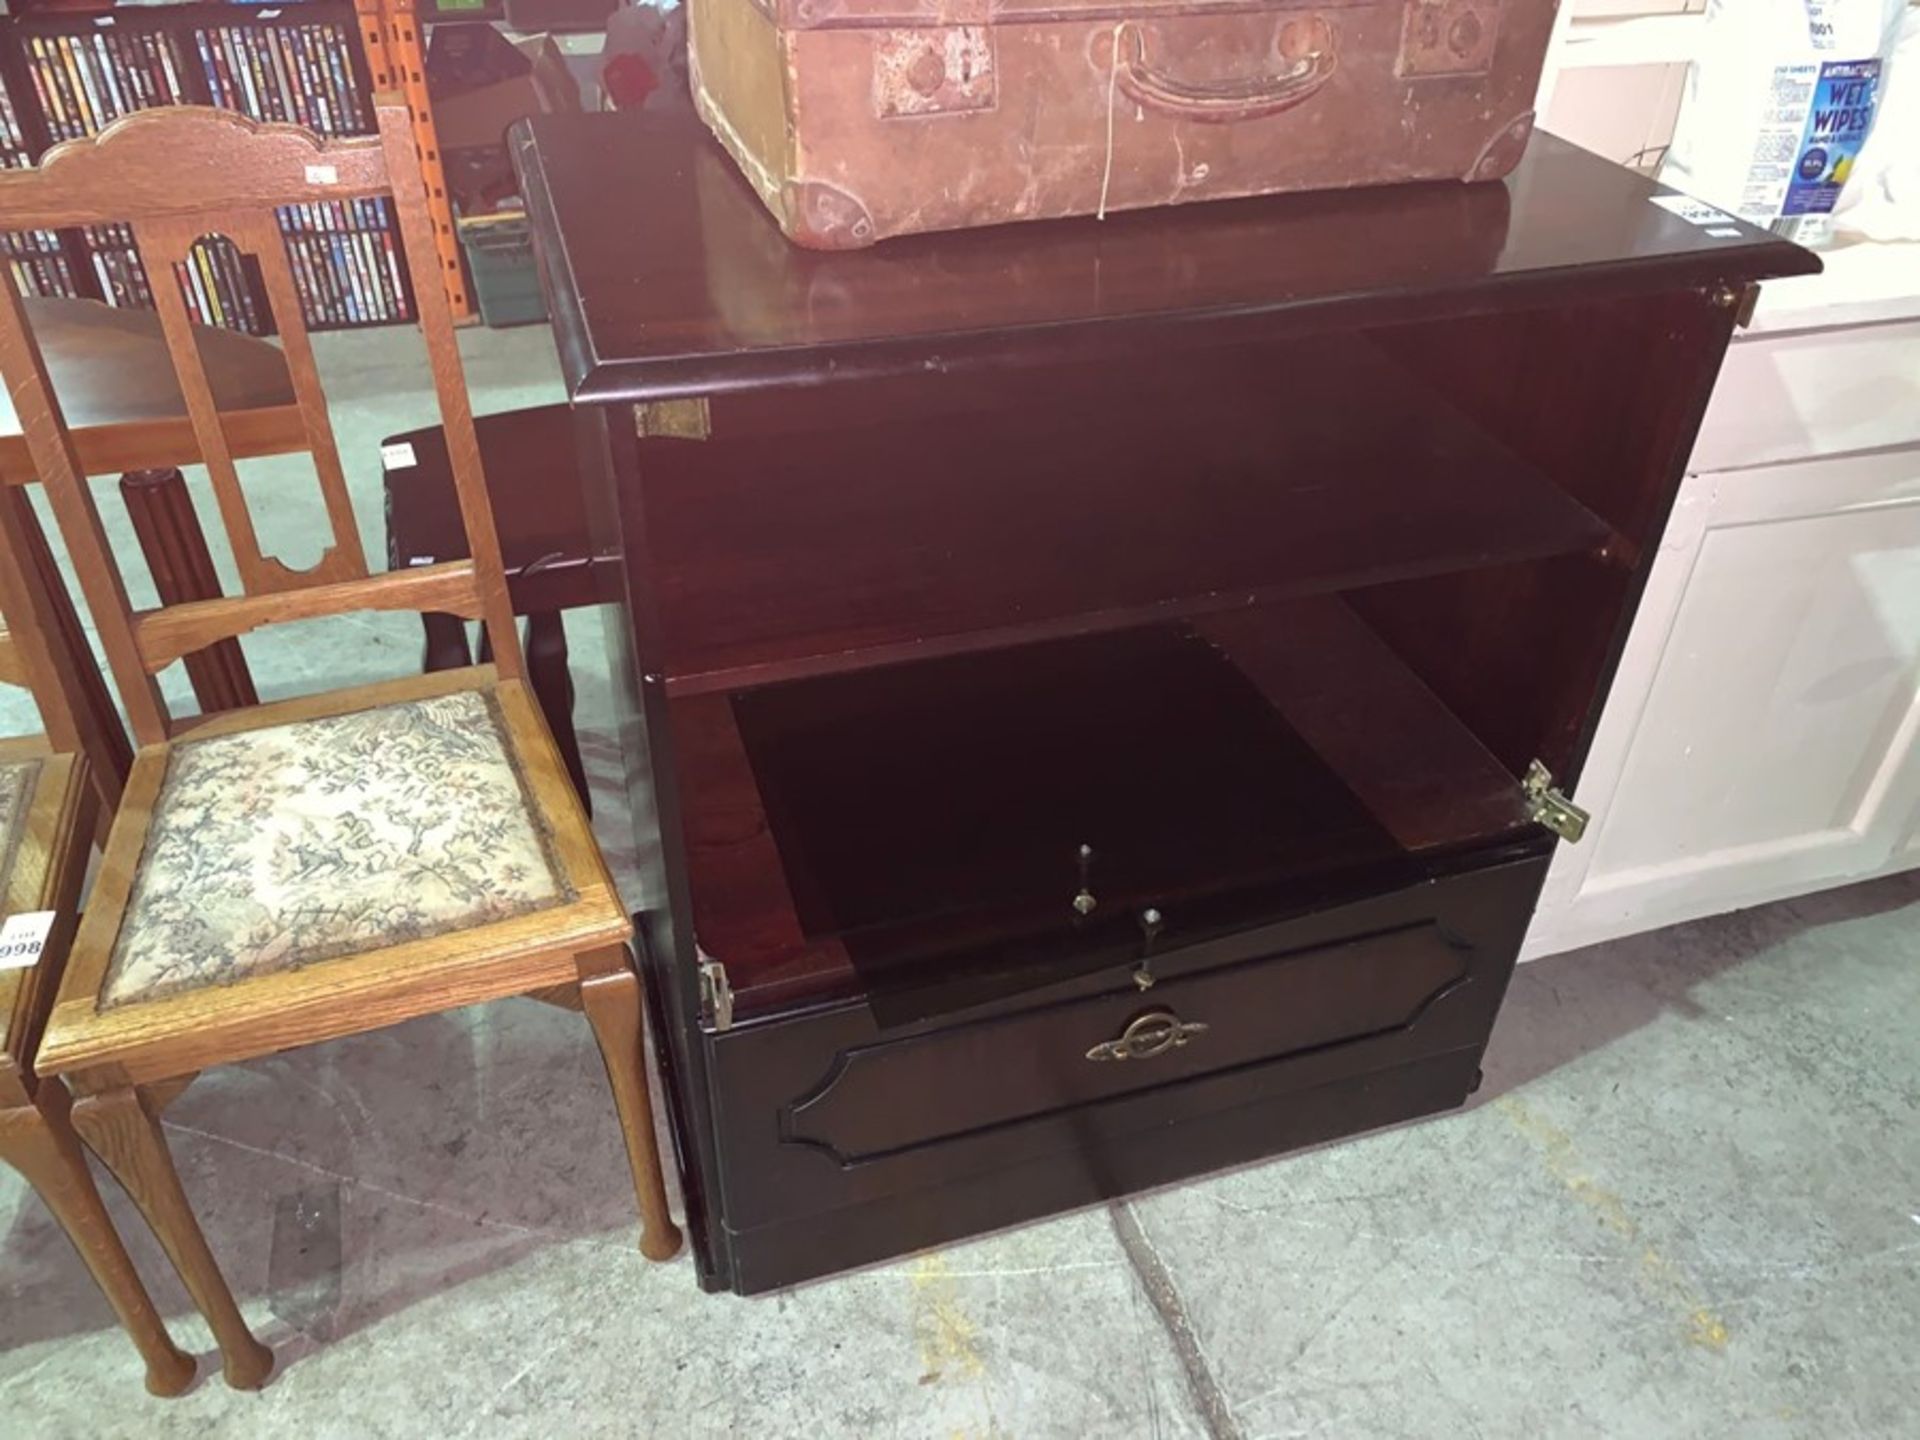 GLASS FRONTED TV CABINET